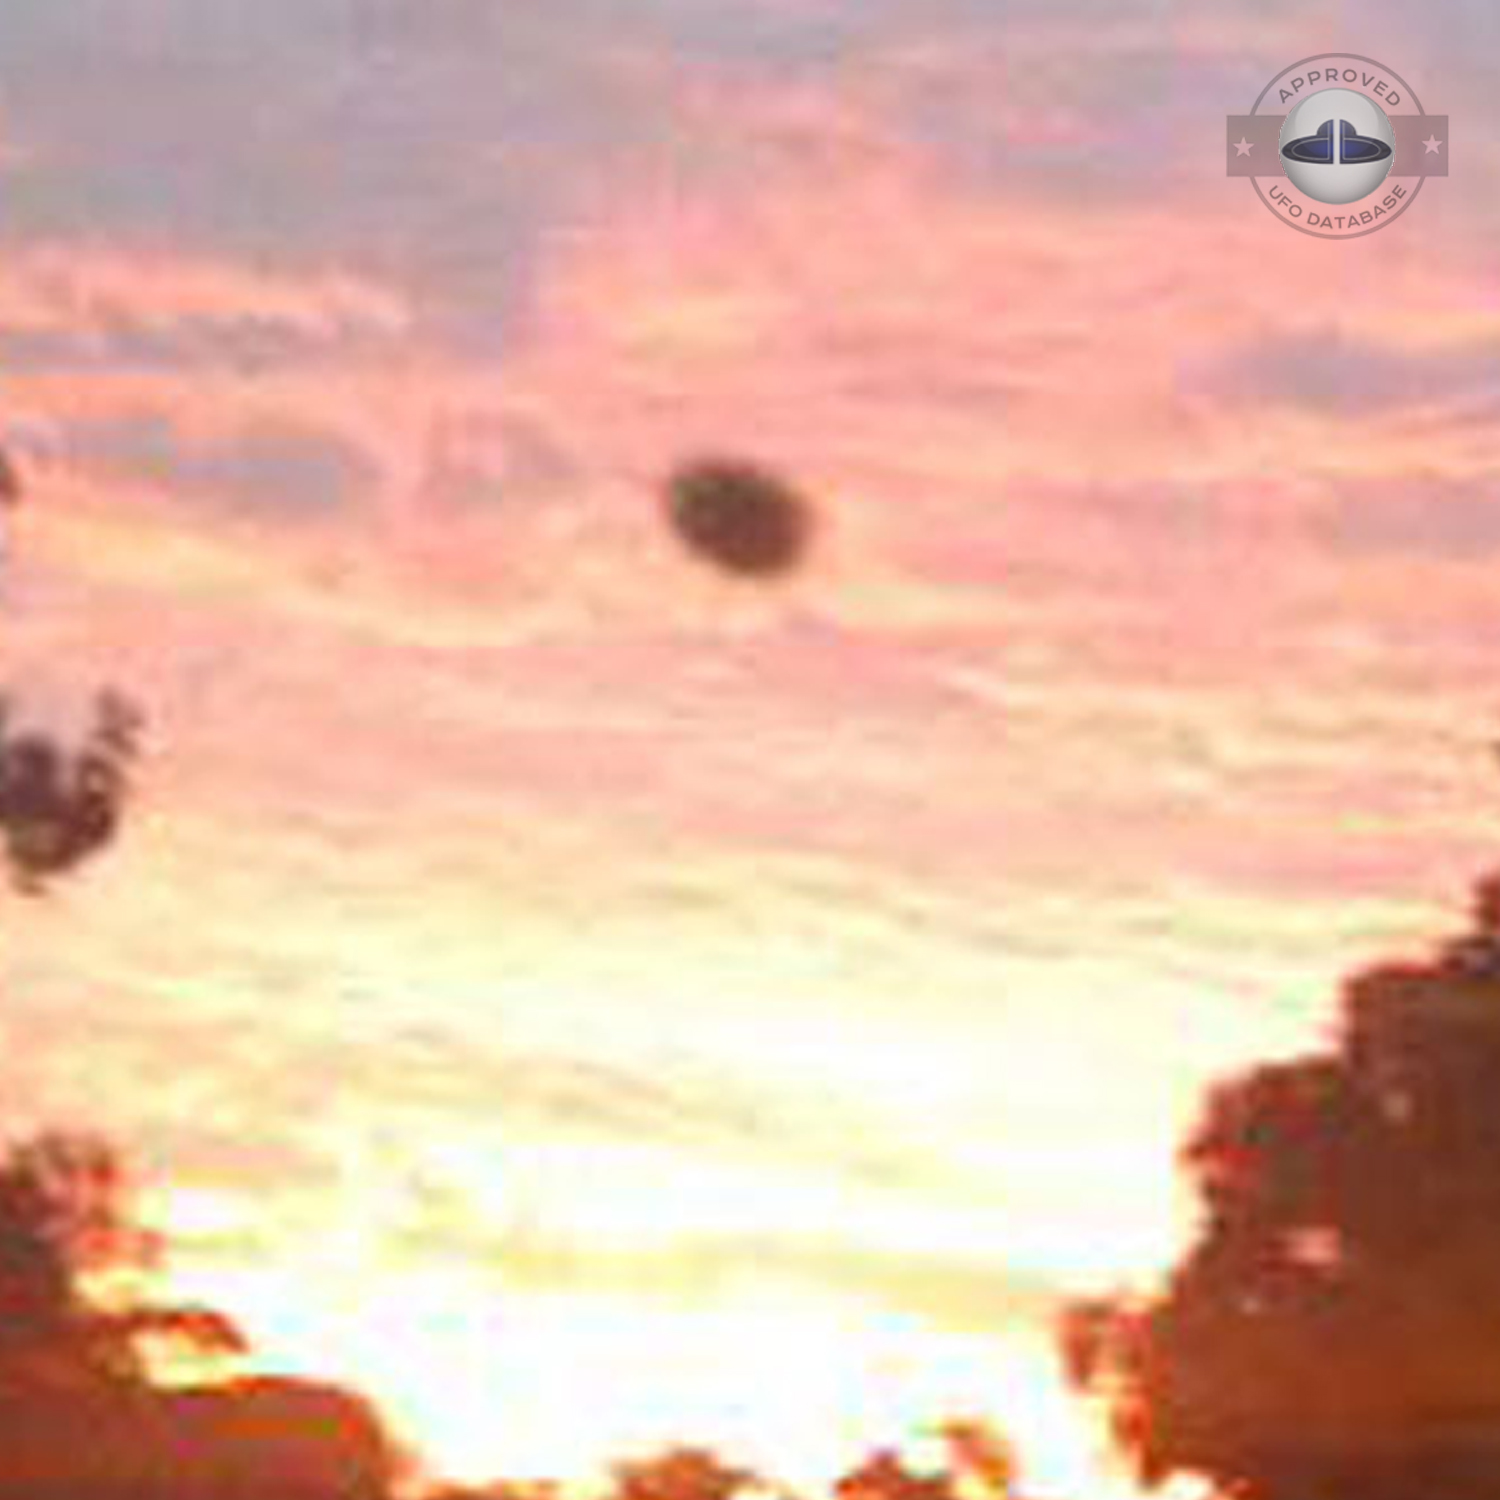 The UFO came out from a light in the cloudy sky during sunset UFO Picture #76-4